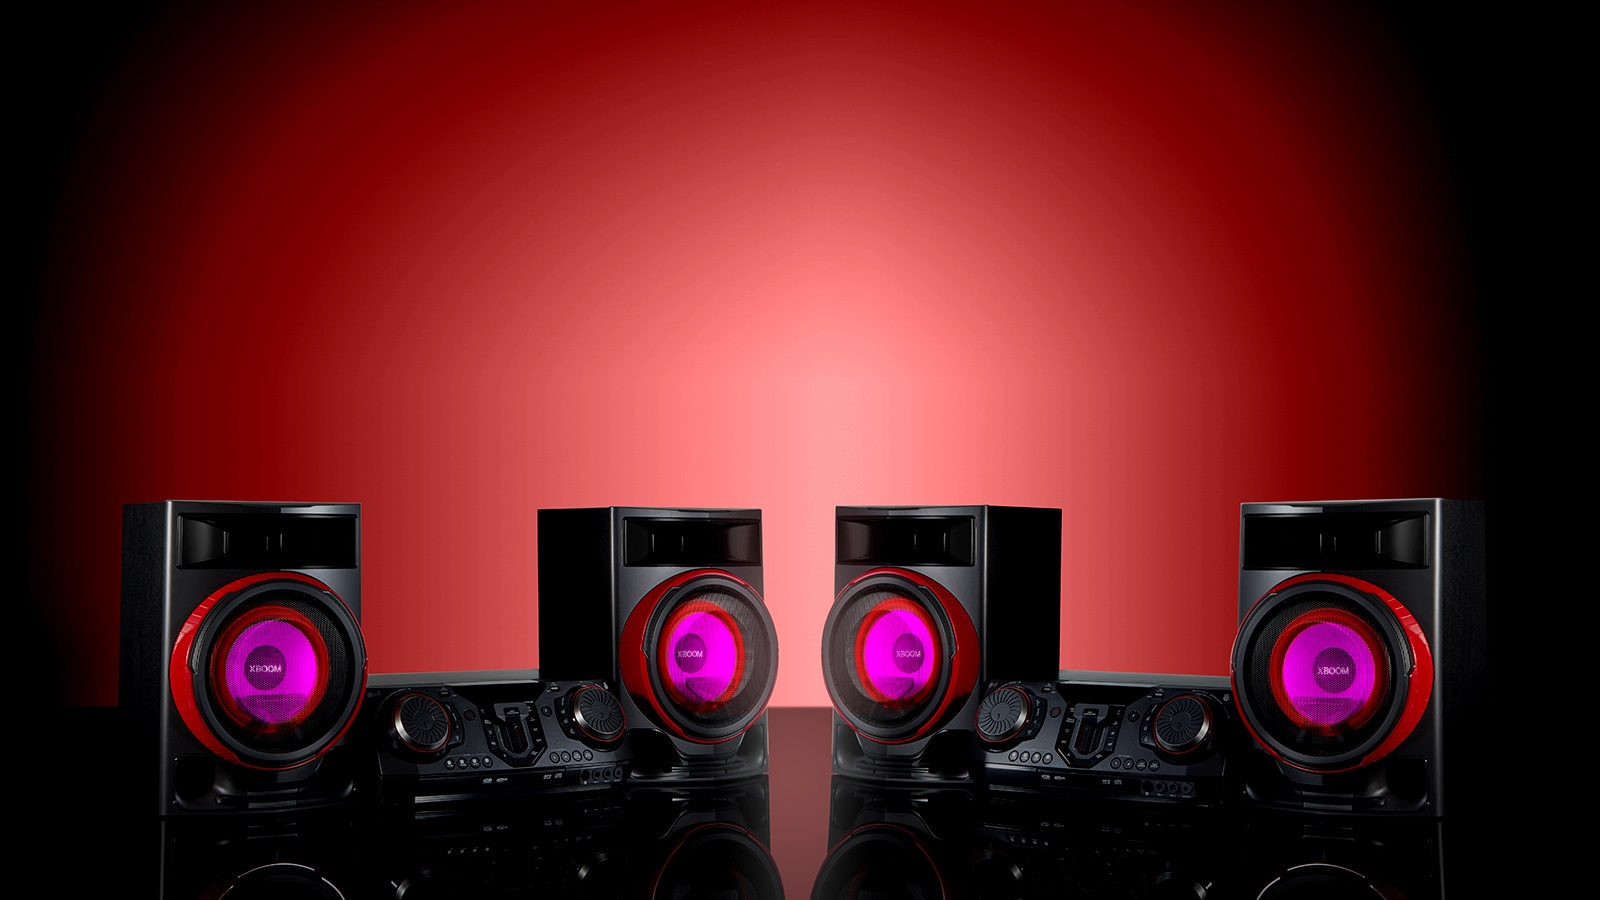 Double Your Sound with Wireless Party Link1